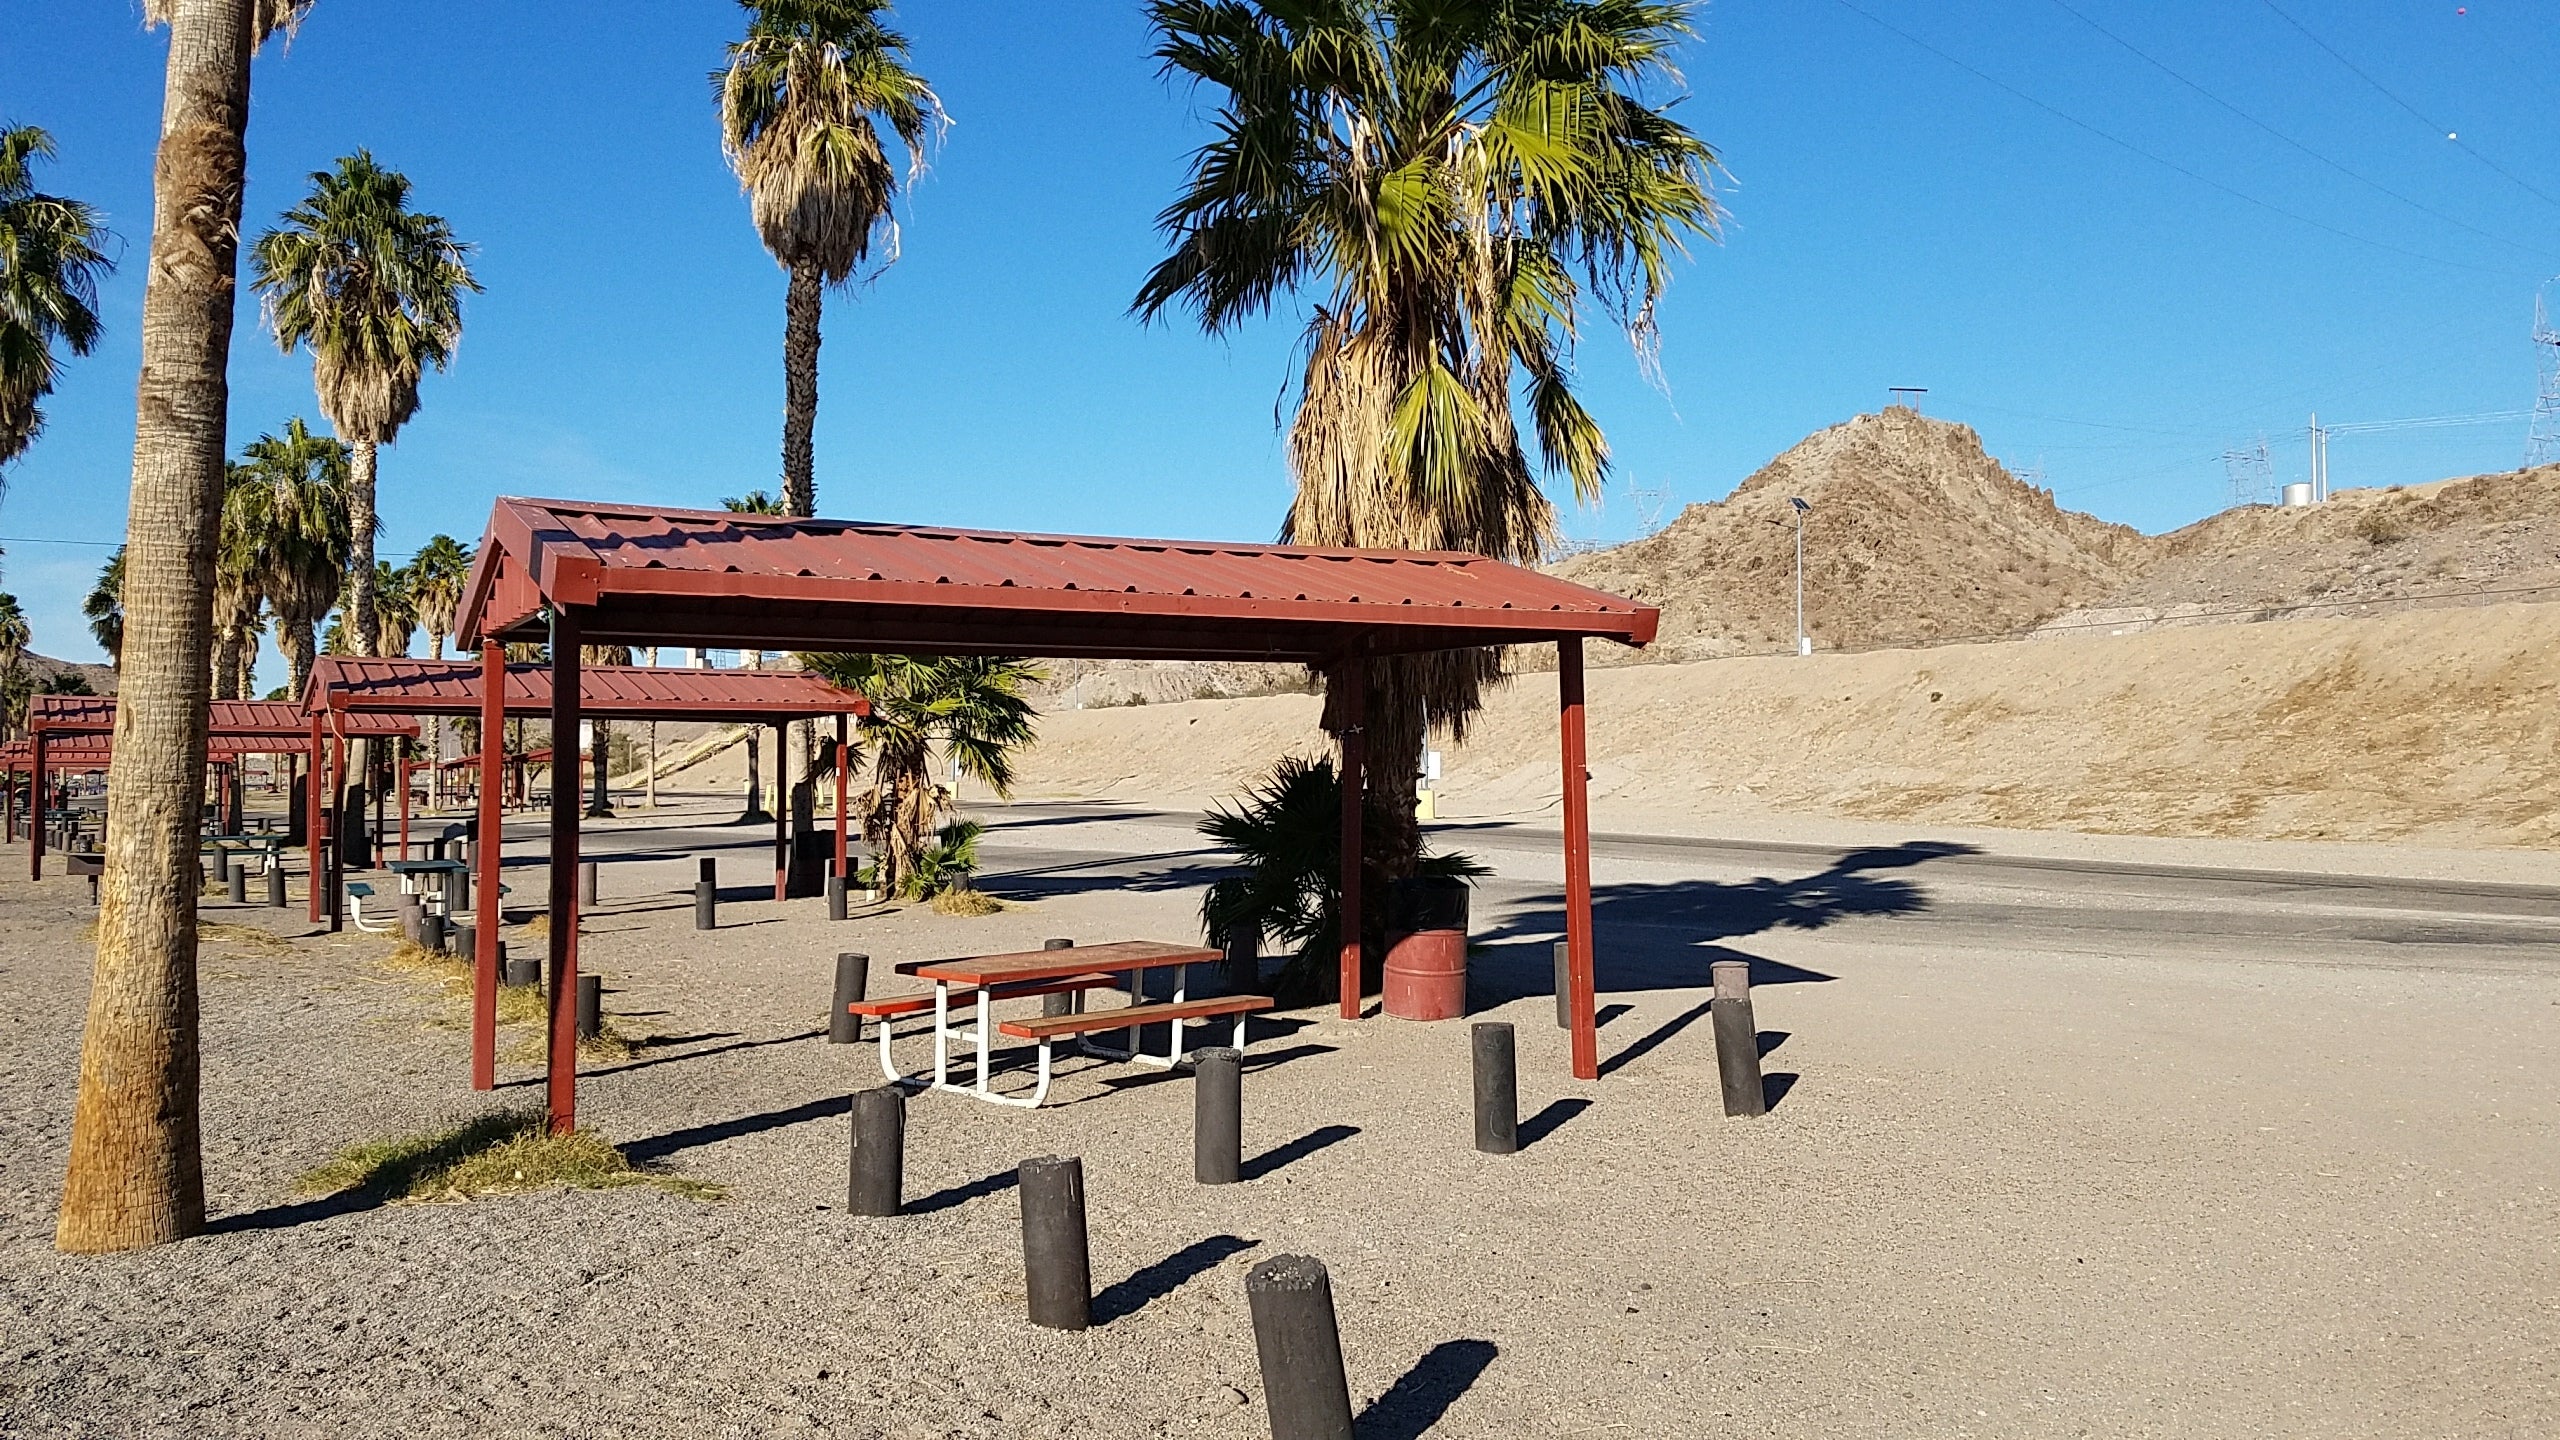 Shade structures & picnic tables